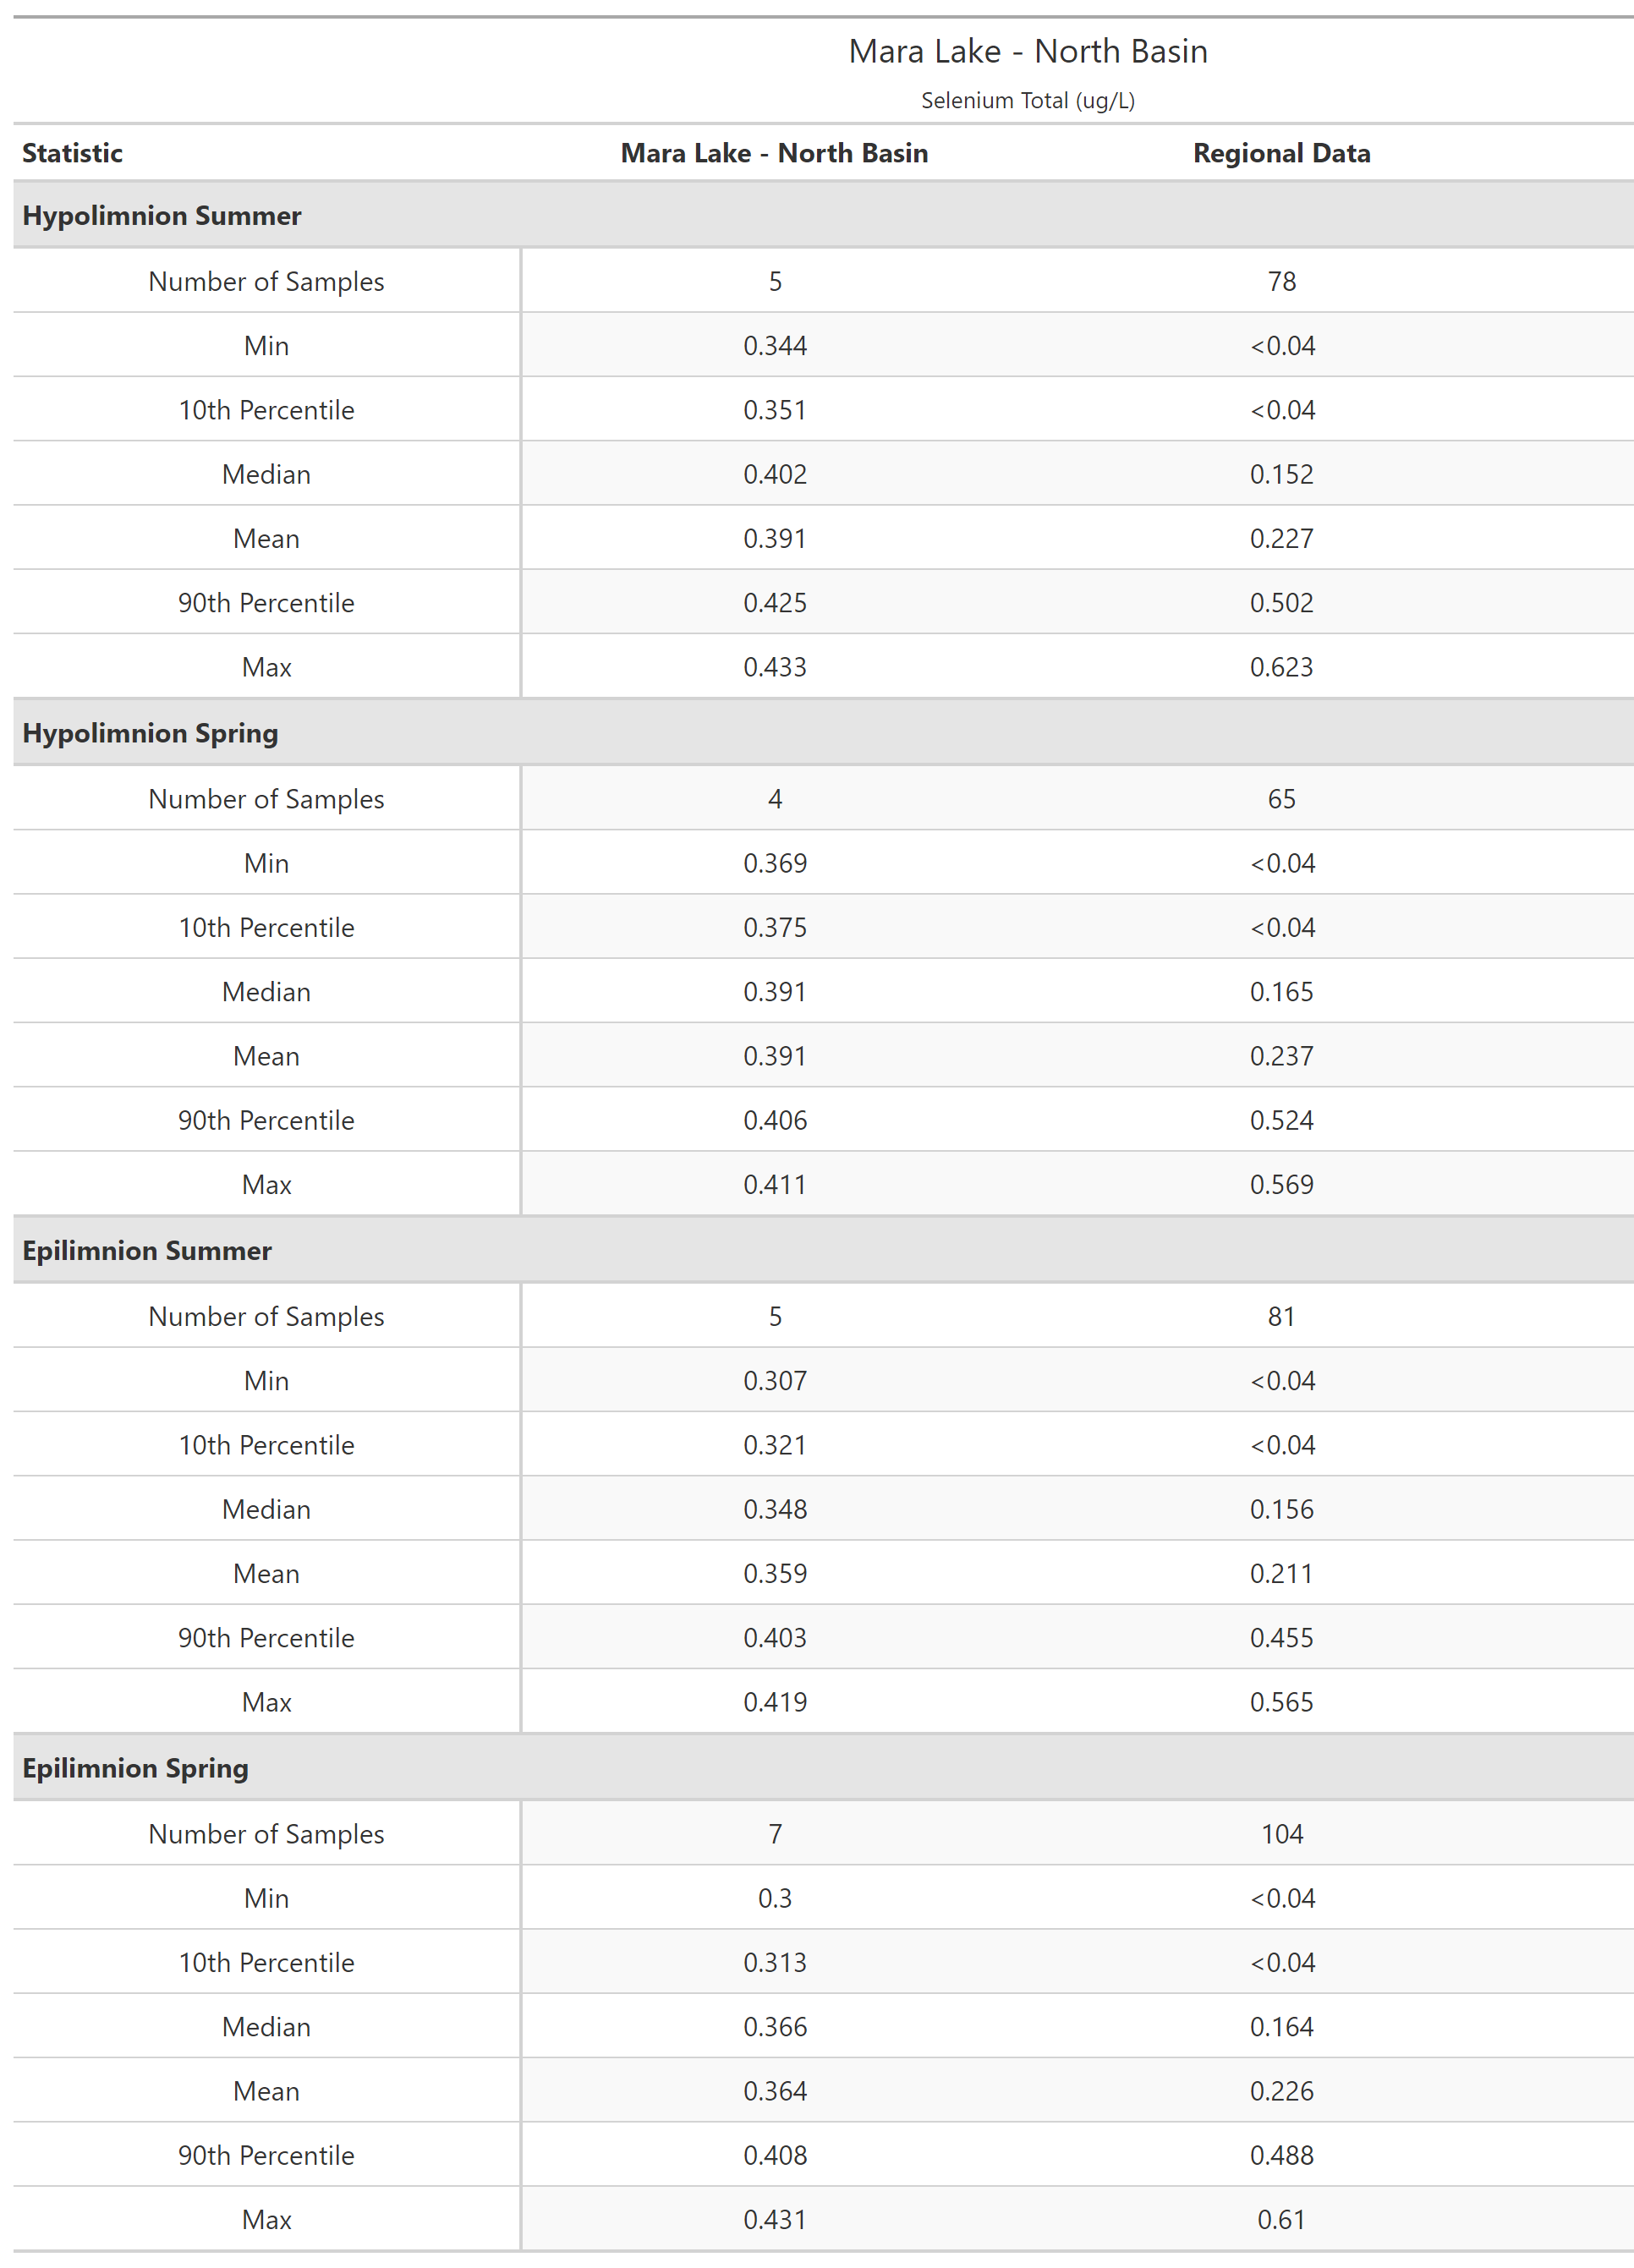 A table of summary statistics for Selenium Total with comparison to regional data